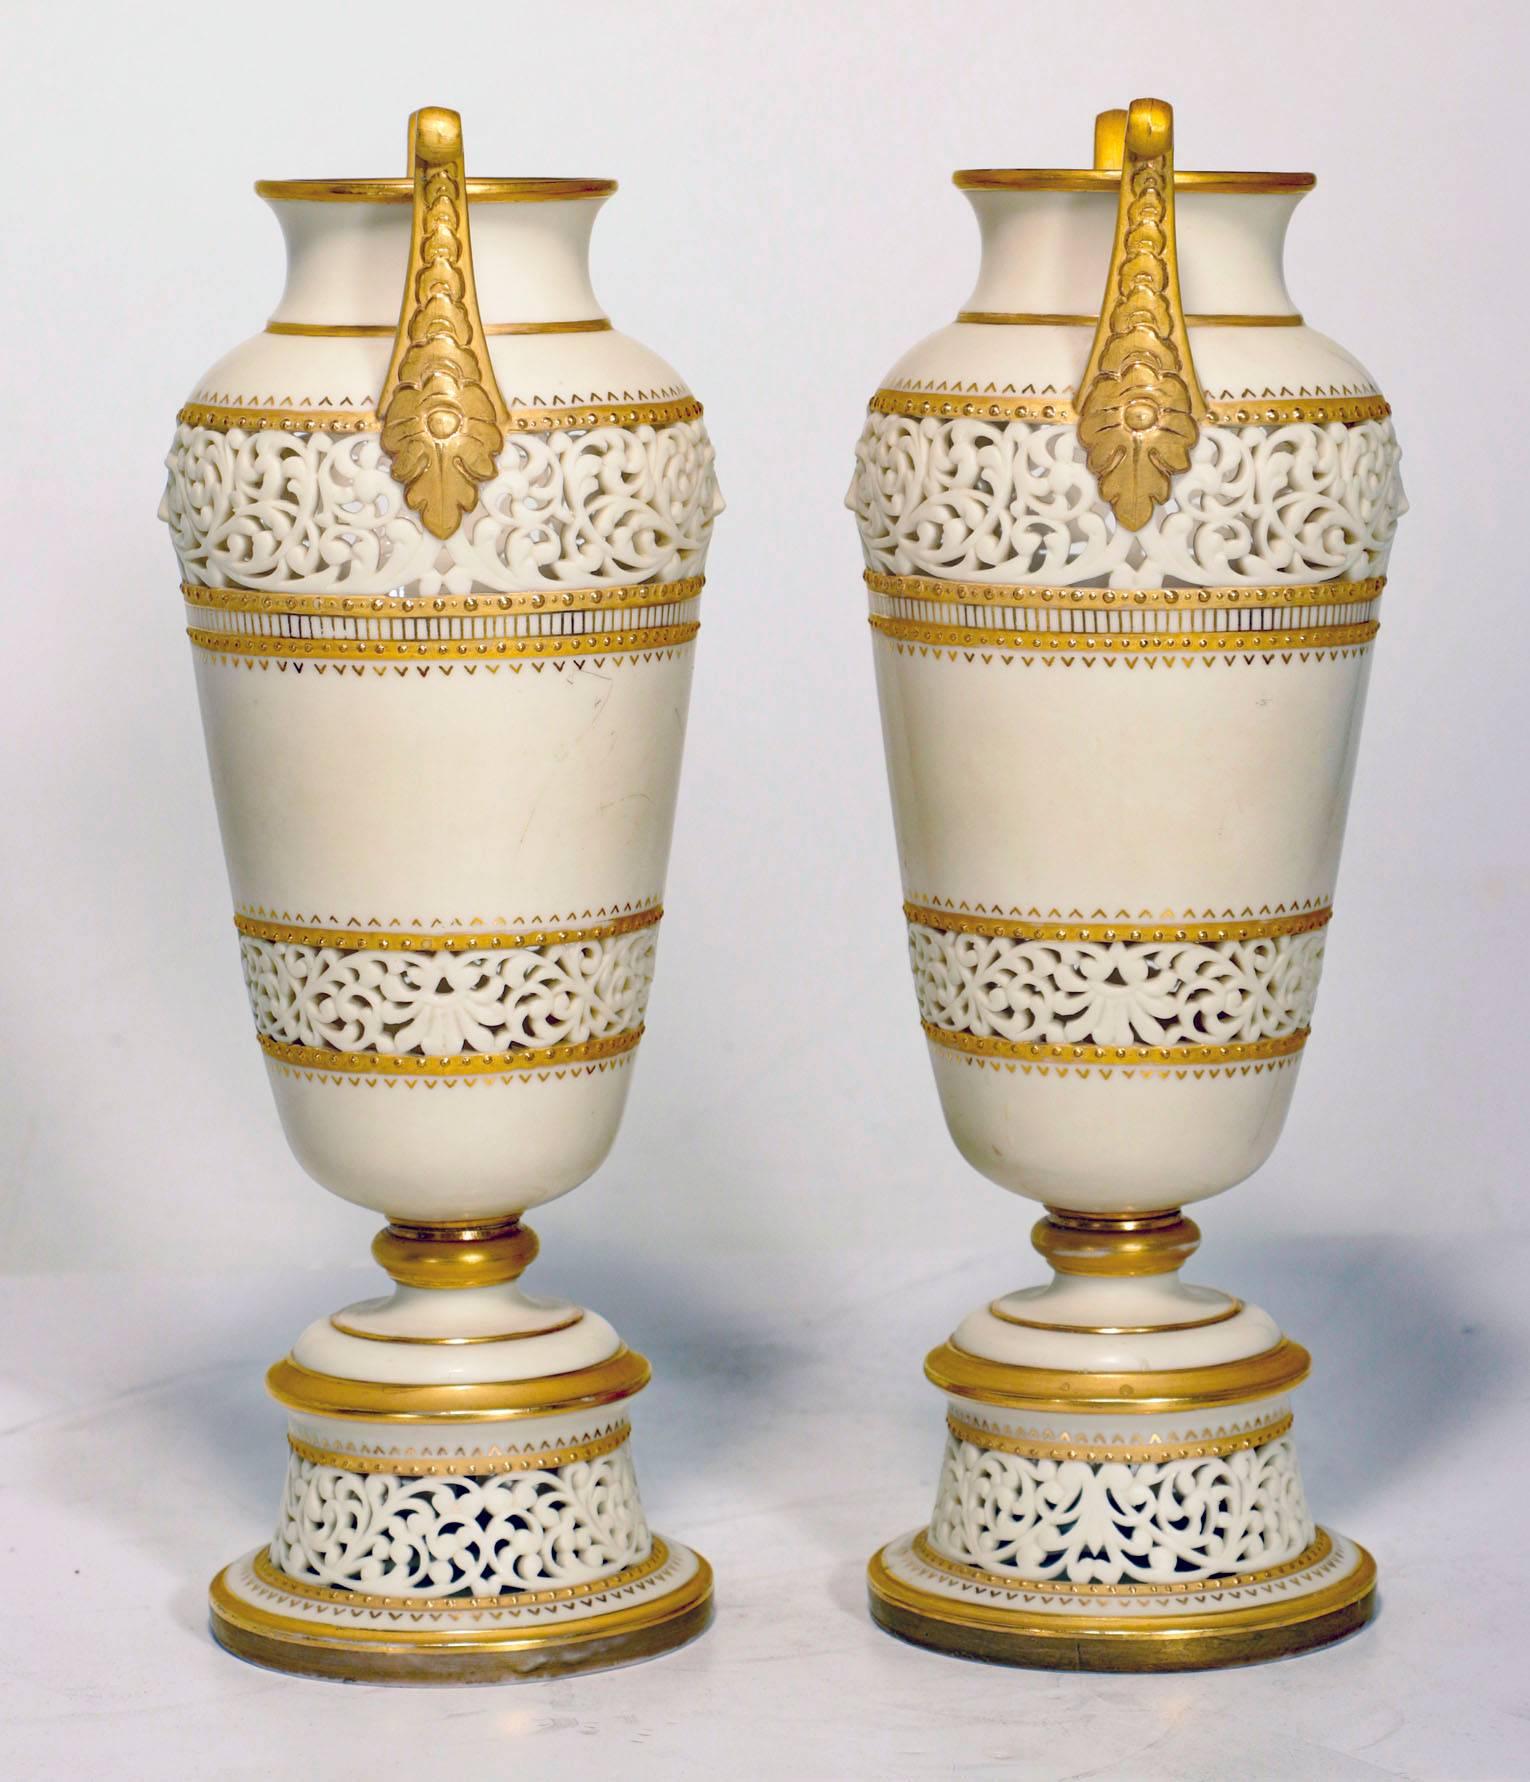 Pair of ivory porcelain Amphora vases with scrolled gilded handles and pierced horizontal bands, edged with gilding and raised on raised circular foot over pierced and gilded plinth.

Printed factory mark. (circa 1889-1890).